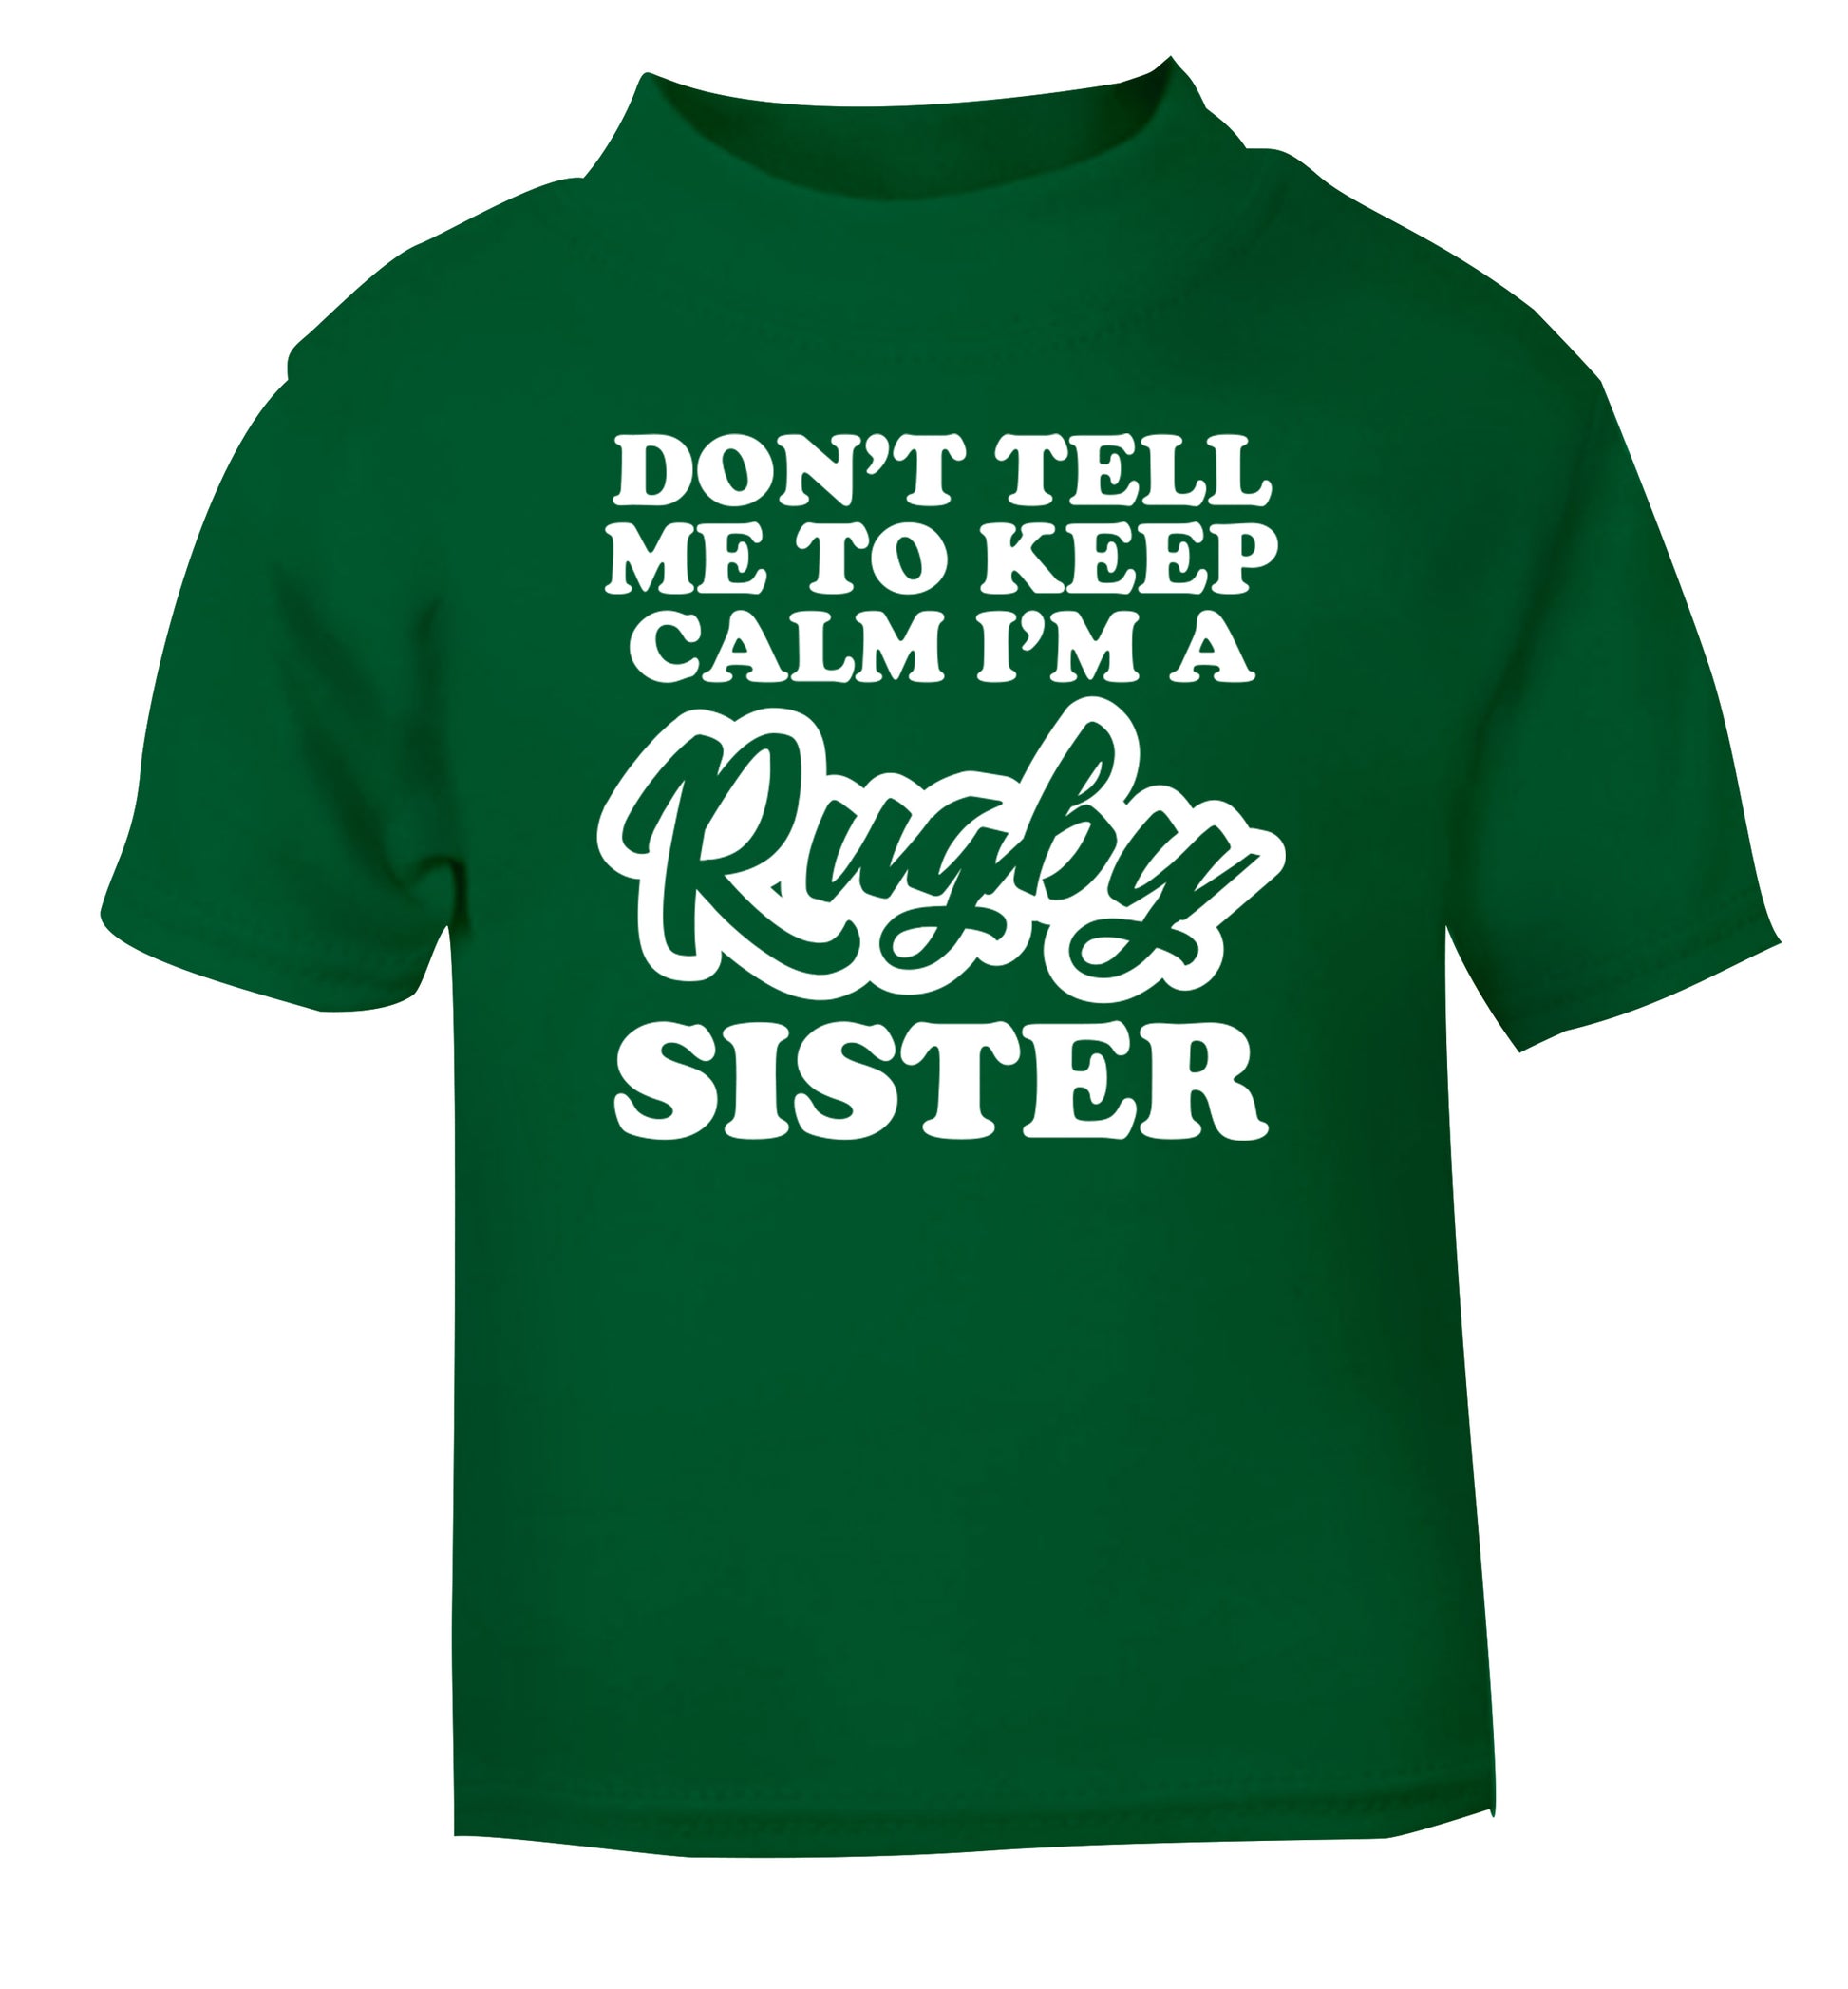 Don't tell me keep calm I'm a rugby sister green Baby Toddler Tshirt 2 Years